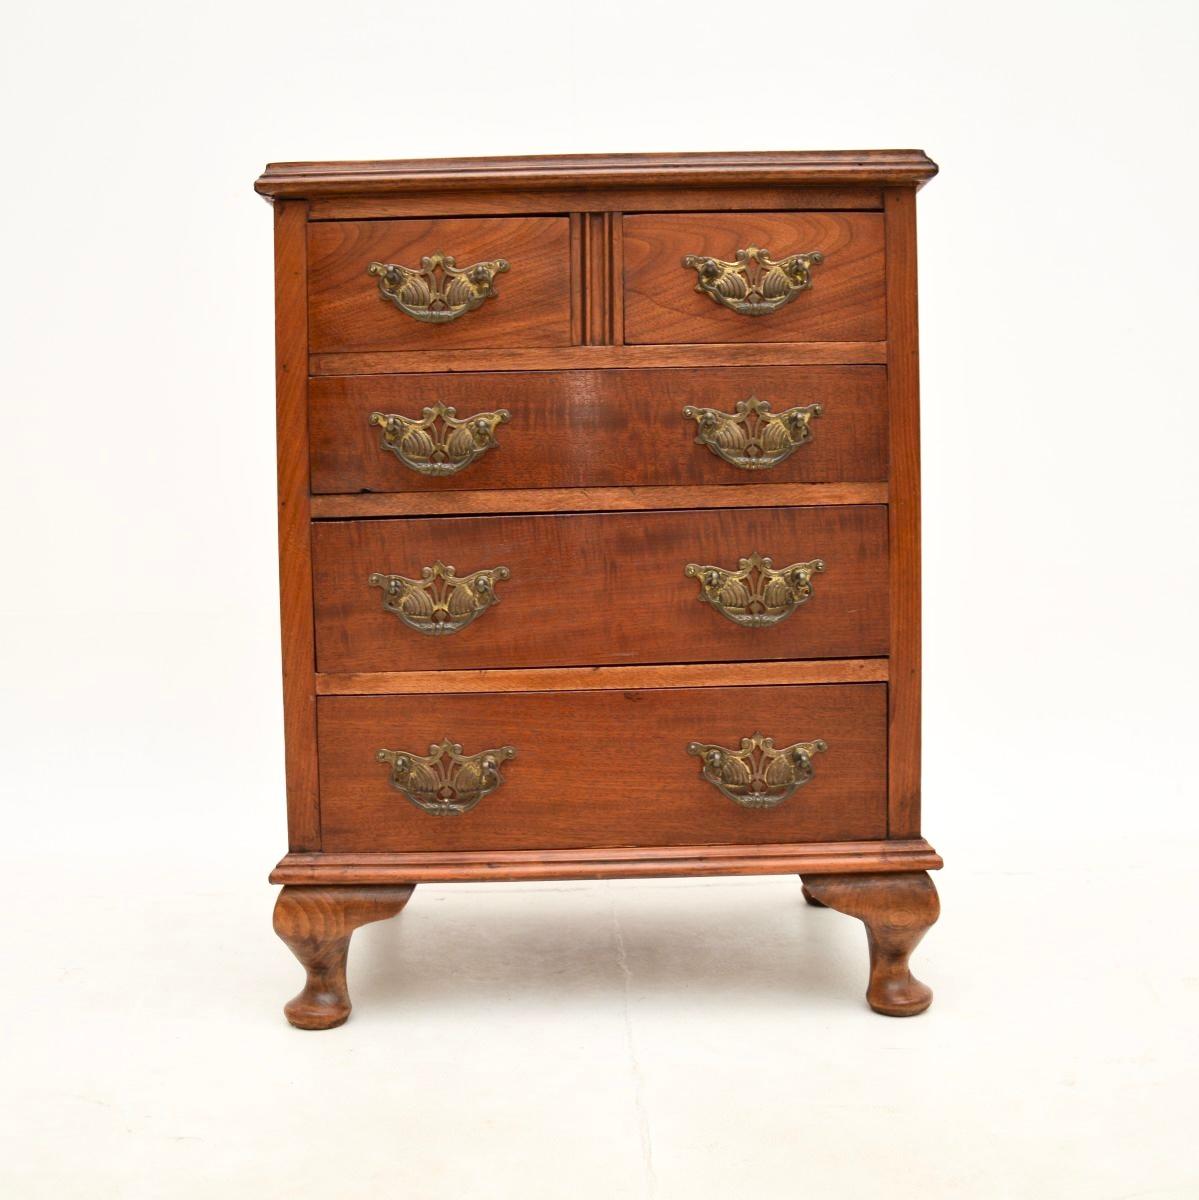 A charming antique walnut chest of drawers, made in England and dating from around the 1920-30’s.

It is of very small proportions, perfect for use as a bedside chest or occasional side table. The walnut has a lovely colour tone, this sits on